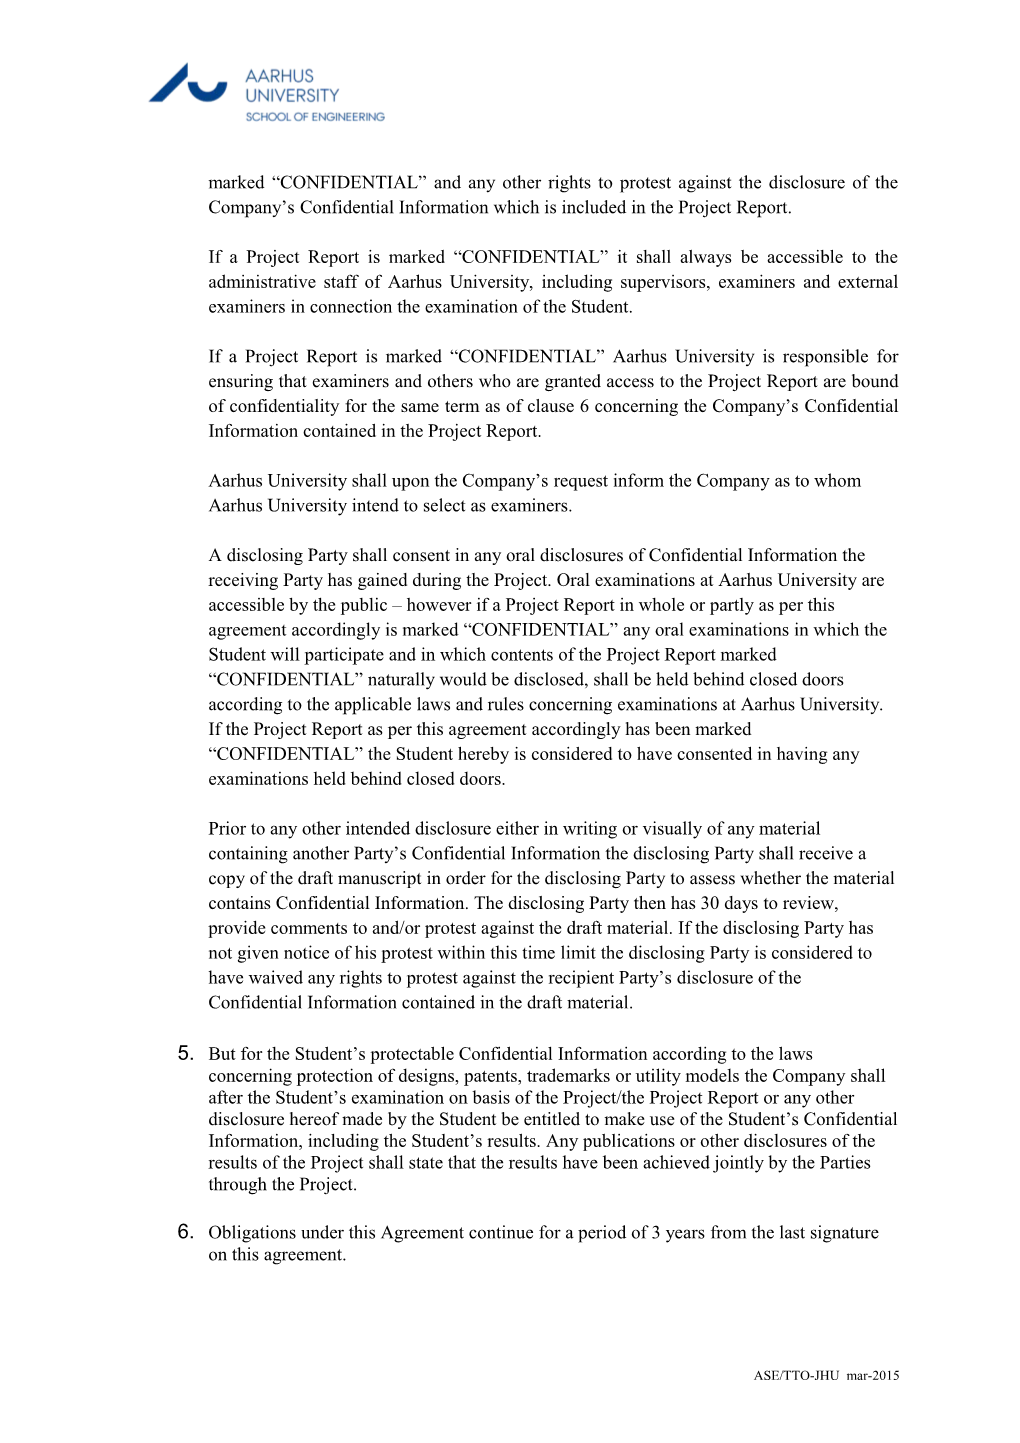 Confidentiality Agreement s7